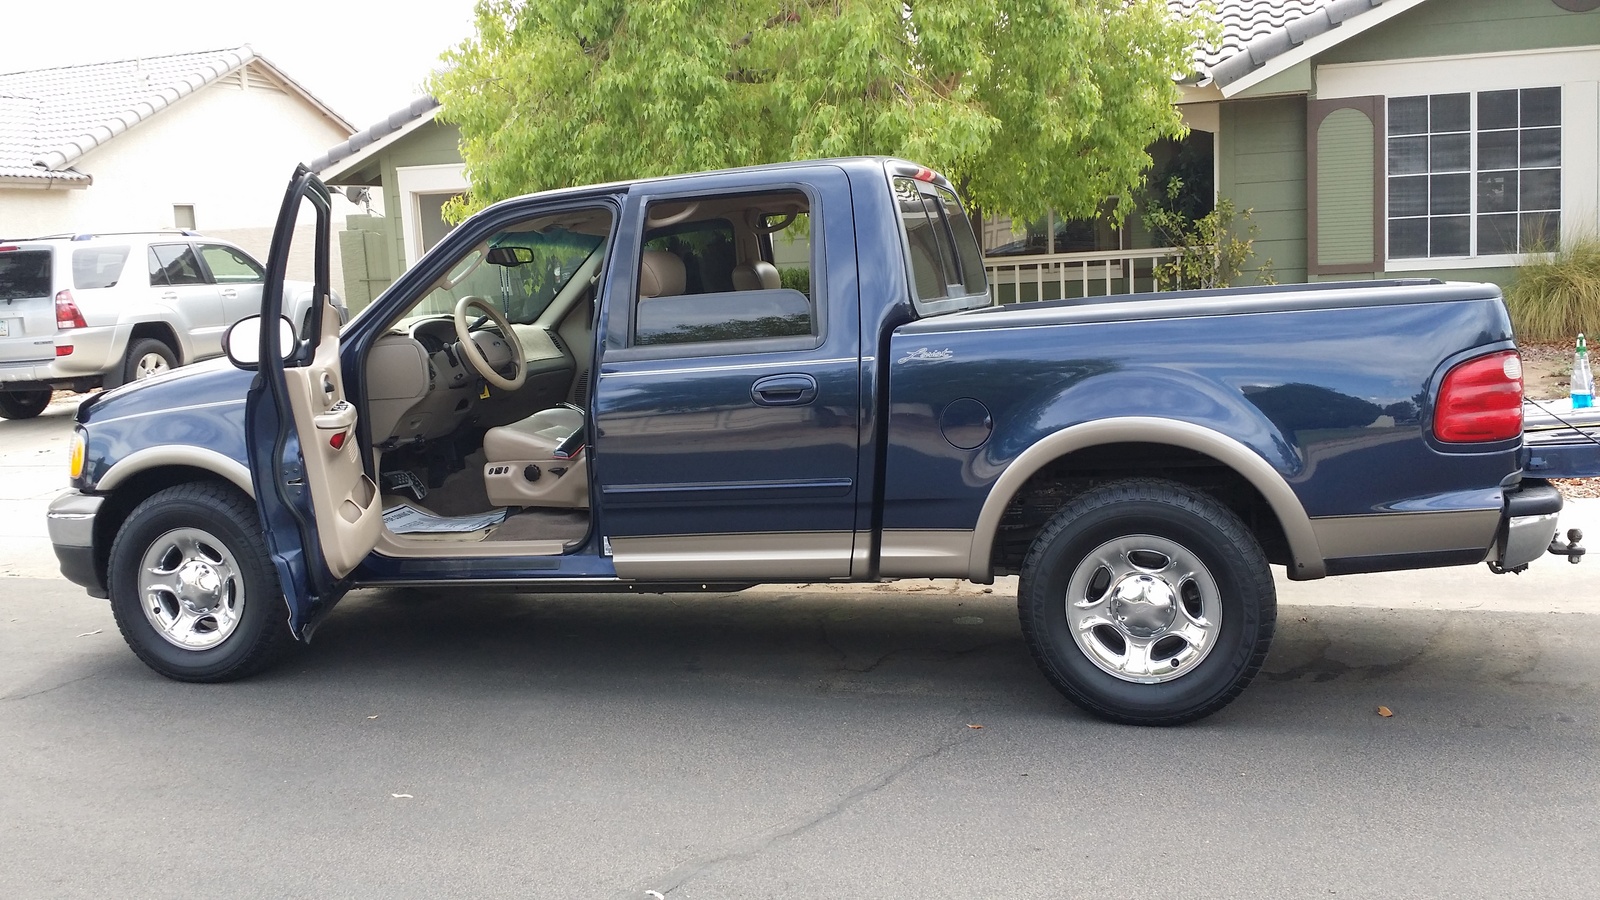 2003 Ford f-150 payload #1